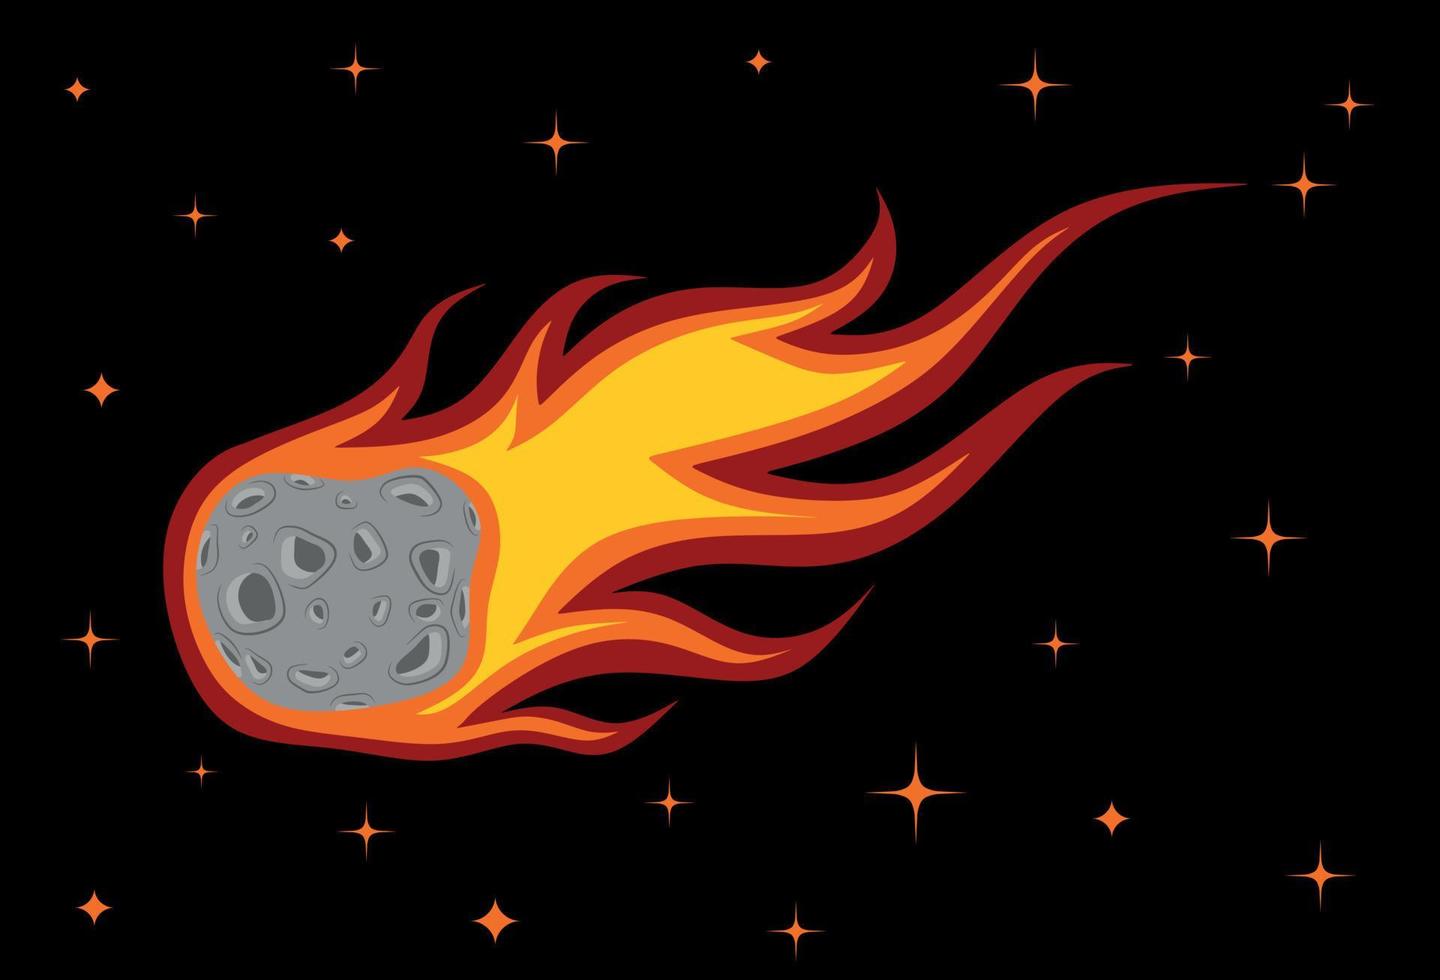 comet glides with fire at night. vector